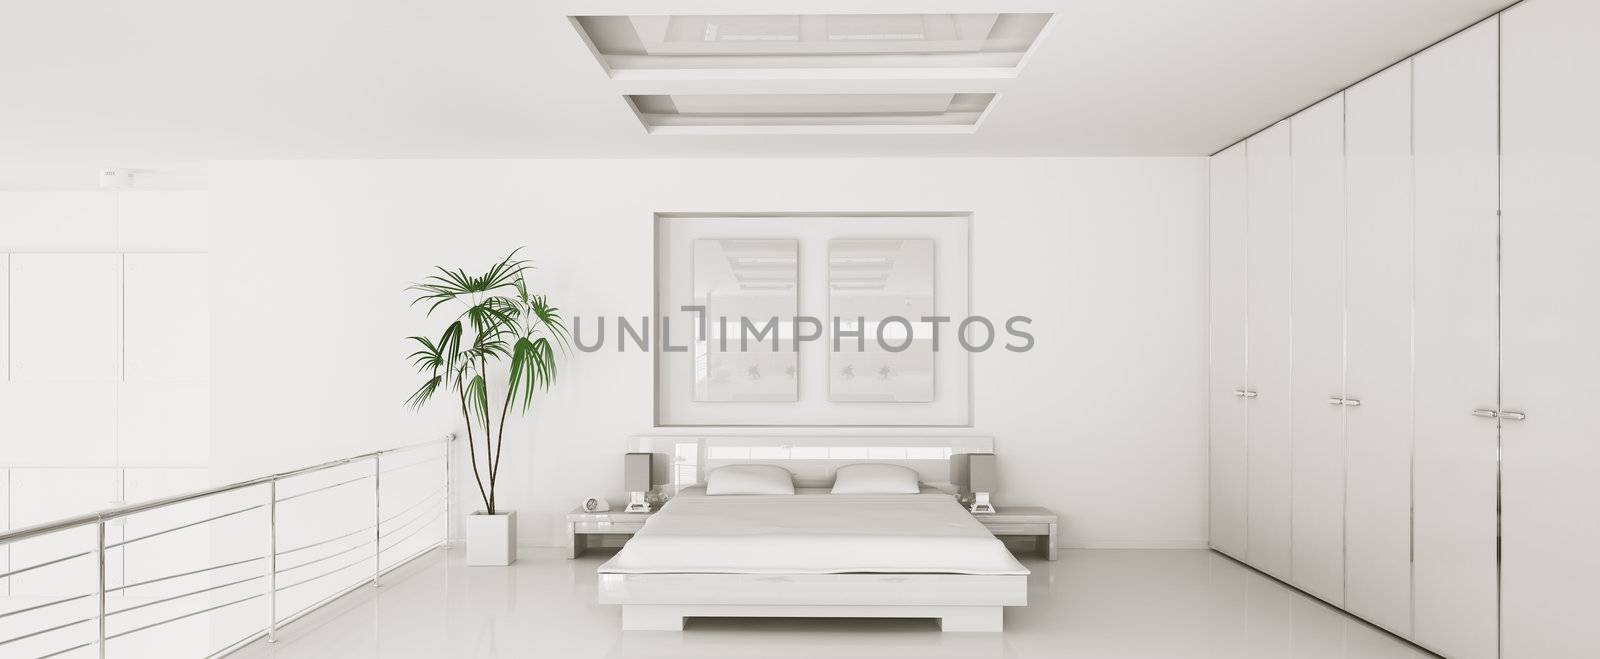 Interior of modern bedroom panorama 3d render by scovad